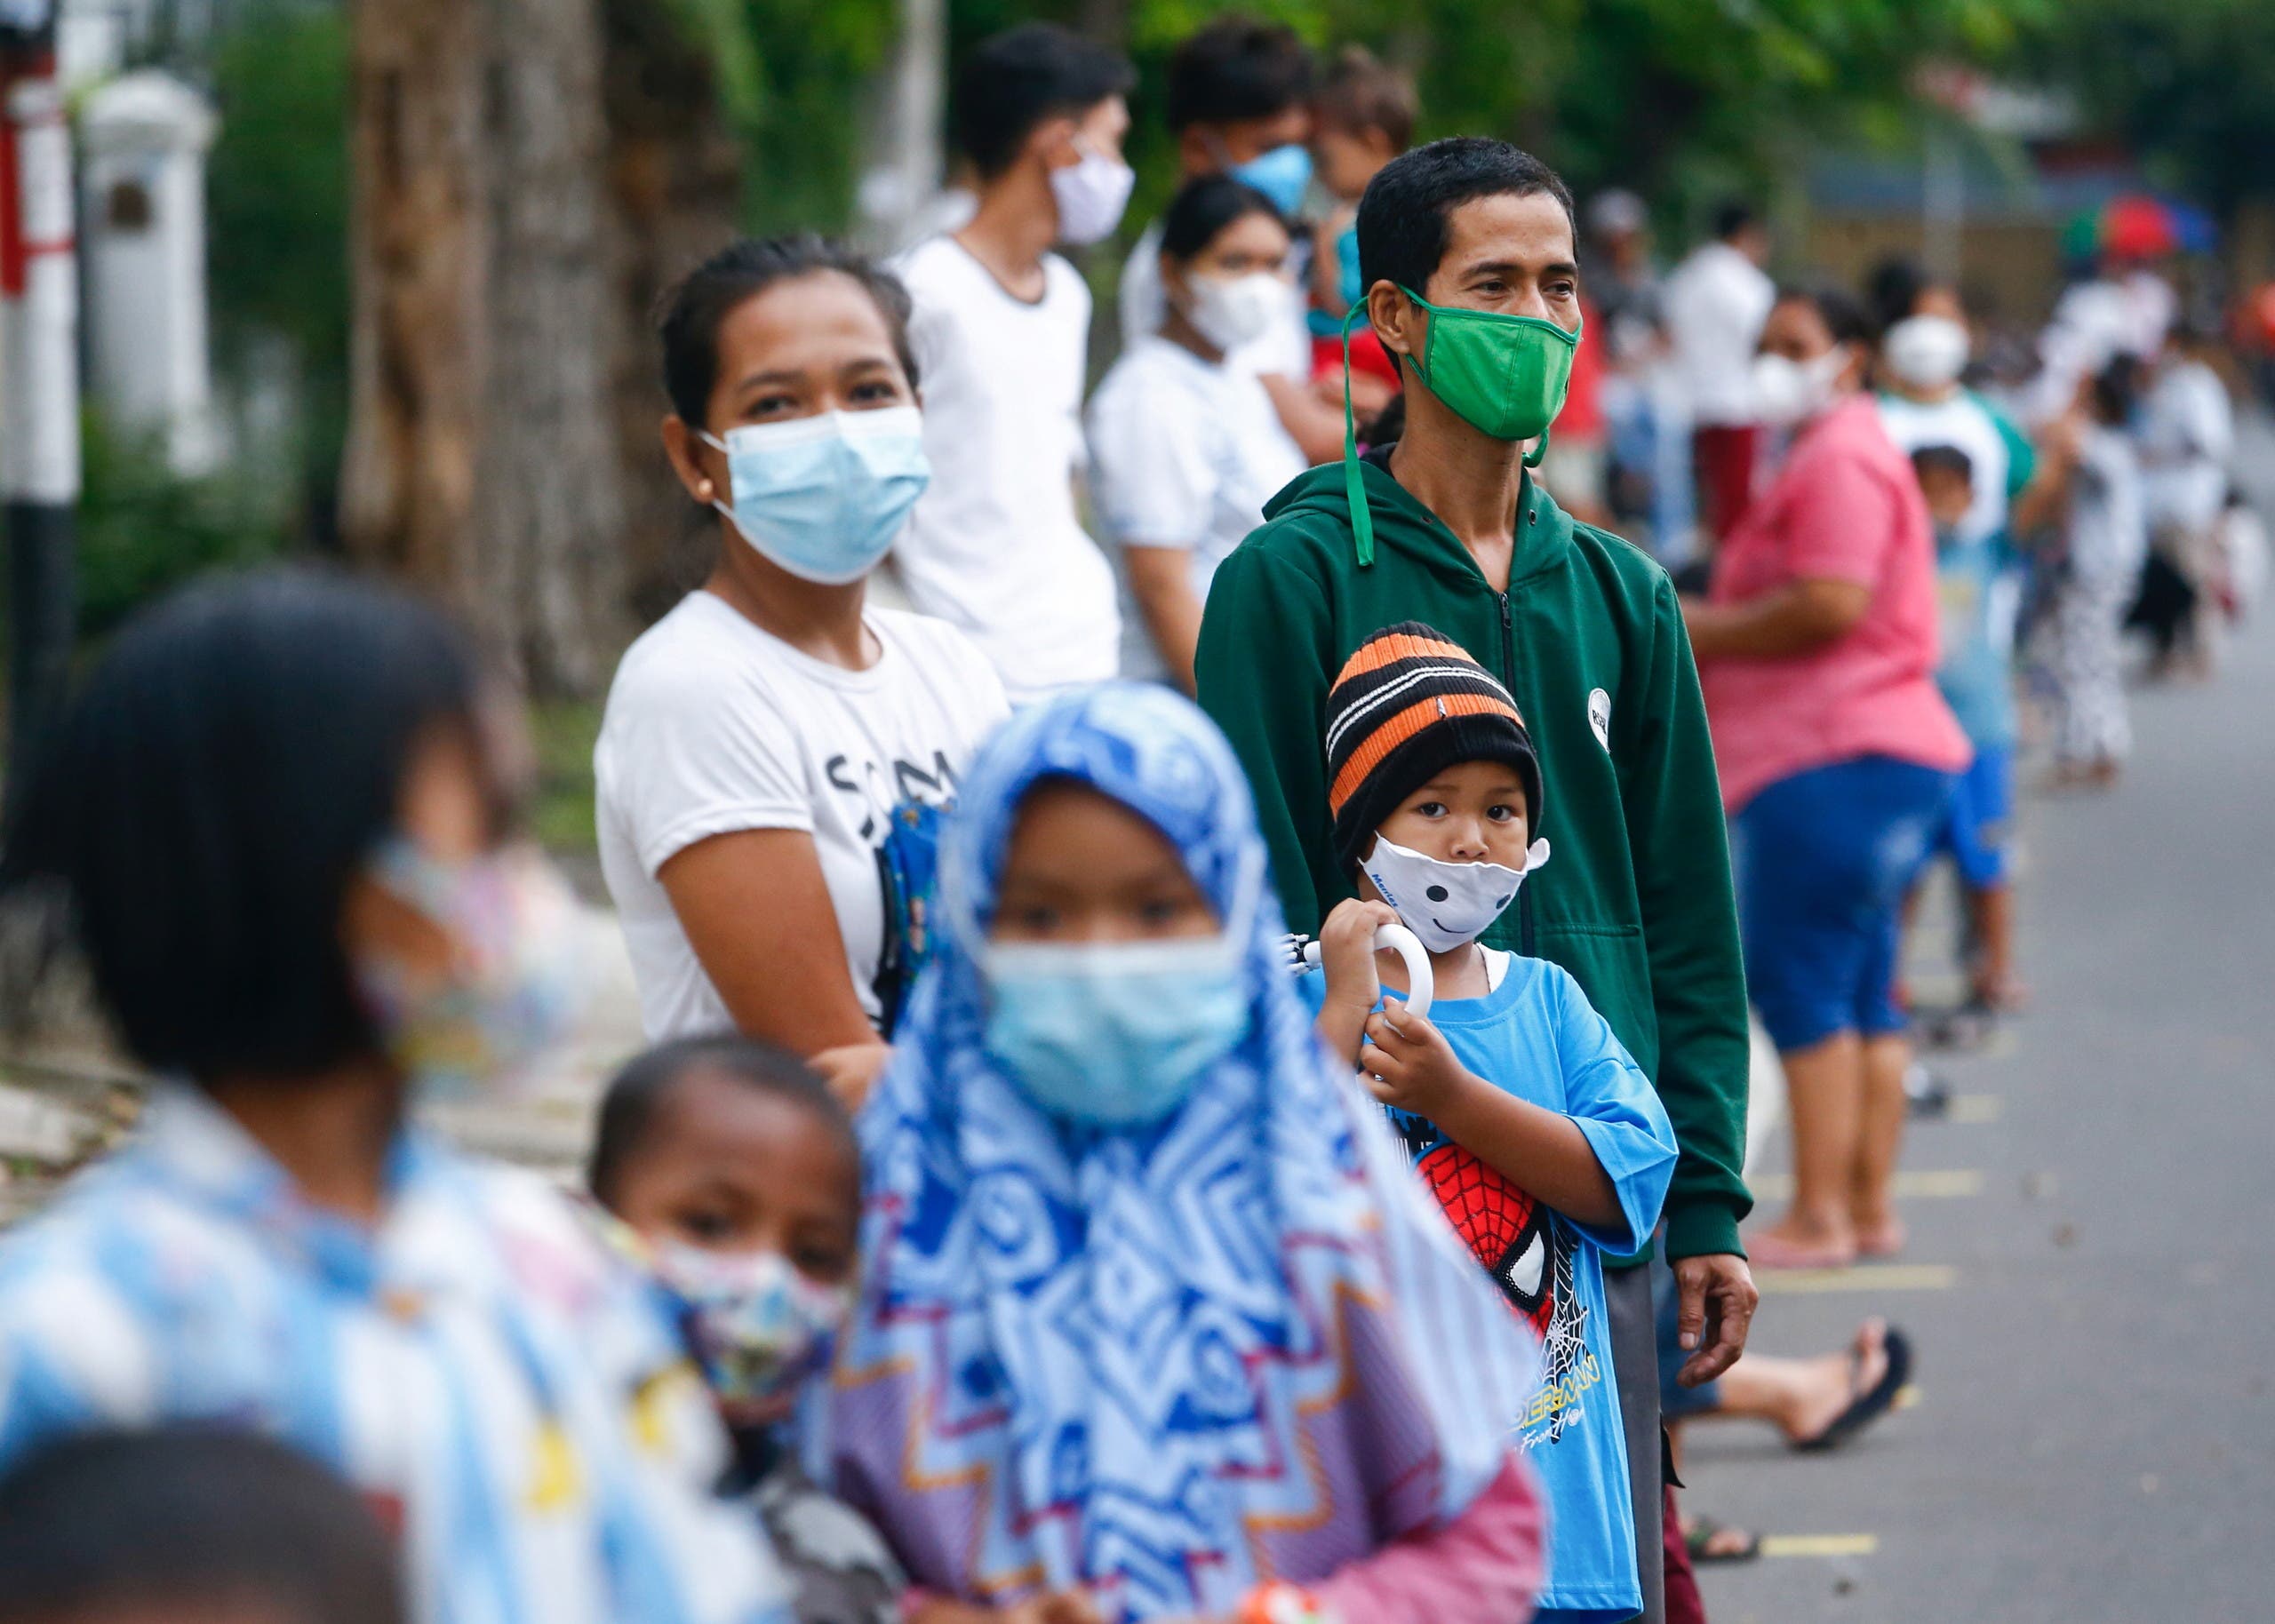 People wearing protective masks stand in line to receive a free meal to break the fast during the holy fasting month of Ramadan amid the coronavirus disease (COVID-19) pandemic in Jakarta, Indonesia, April 15, 2021. (File photo: Reuters)